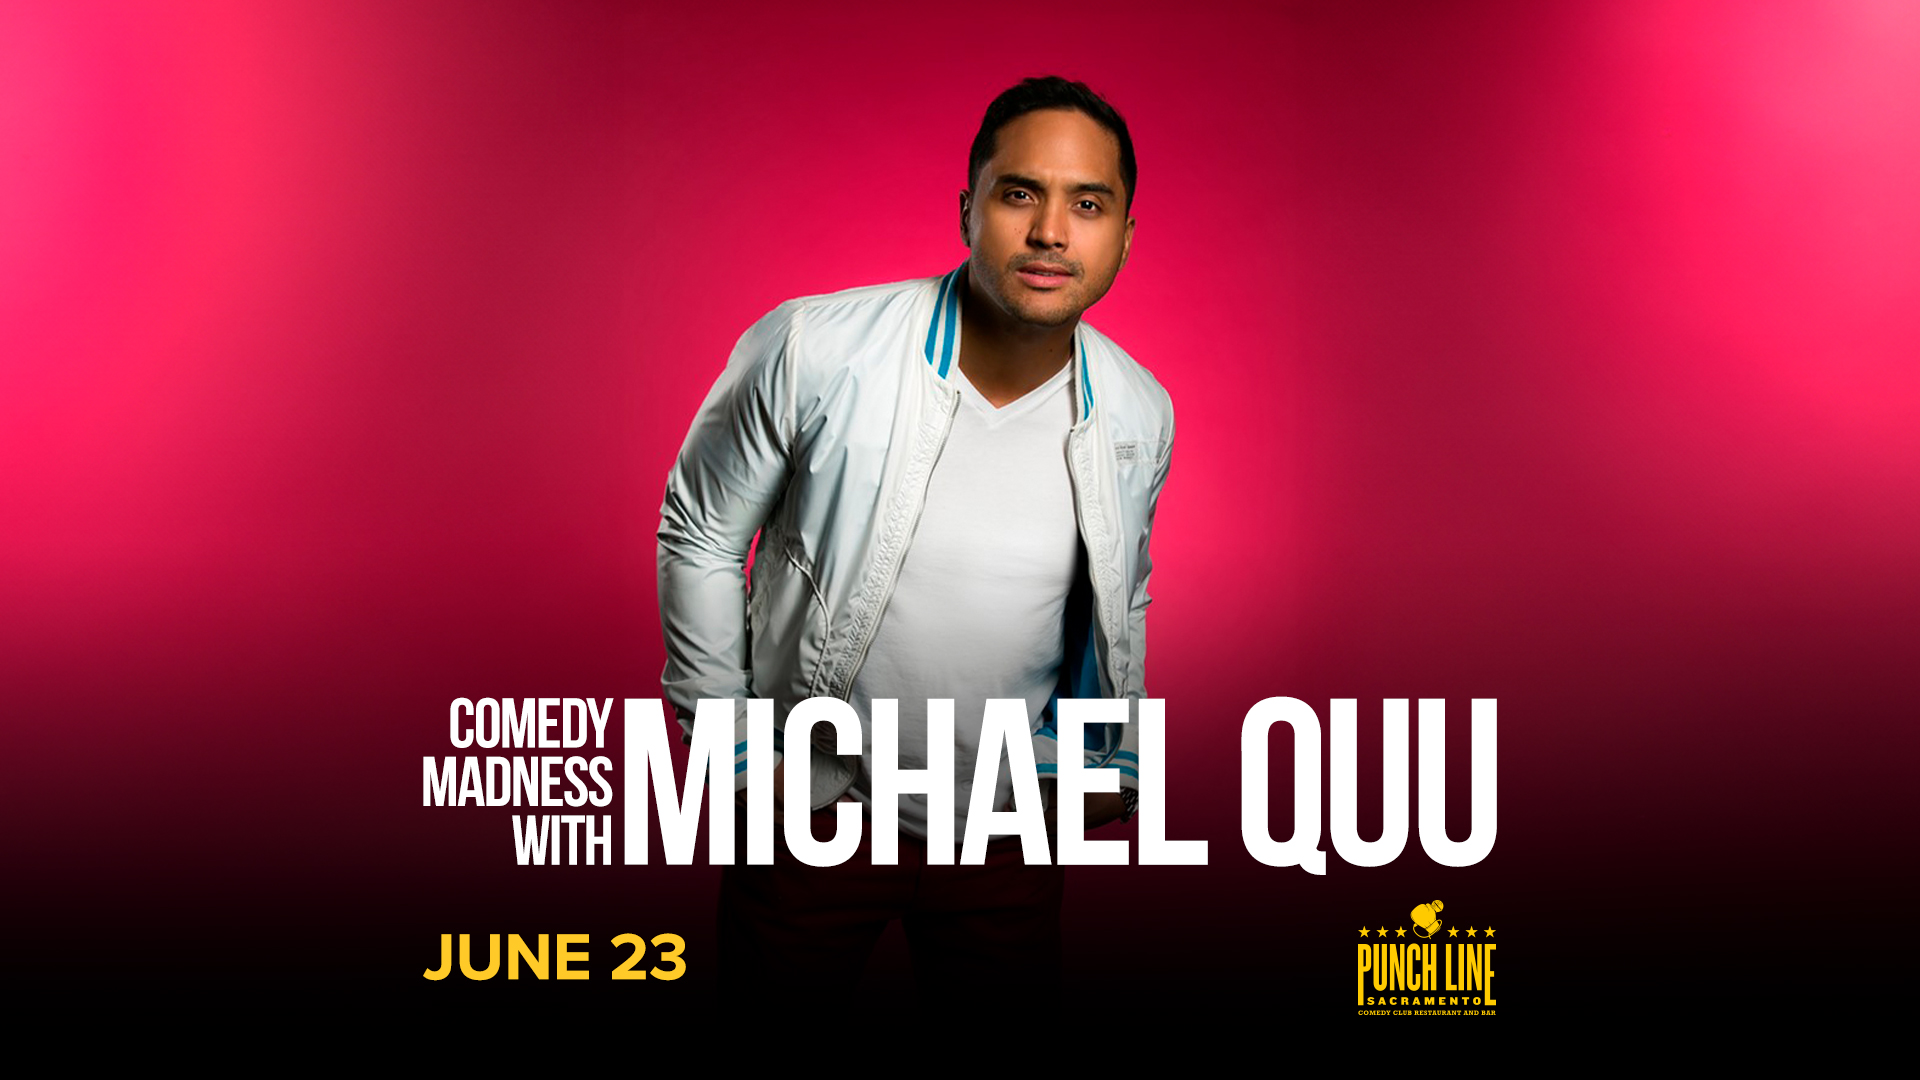 Comedy Madness Show with Michael Quu